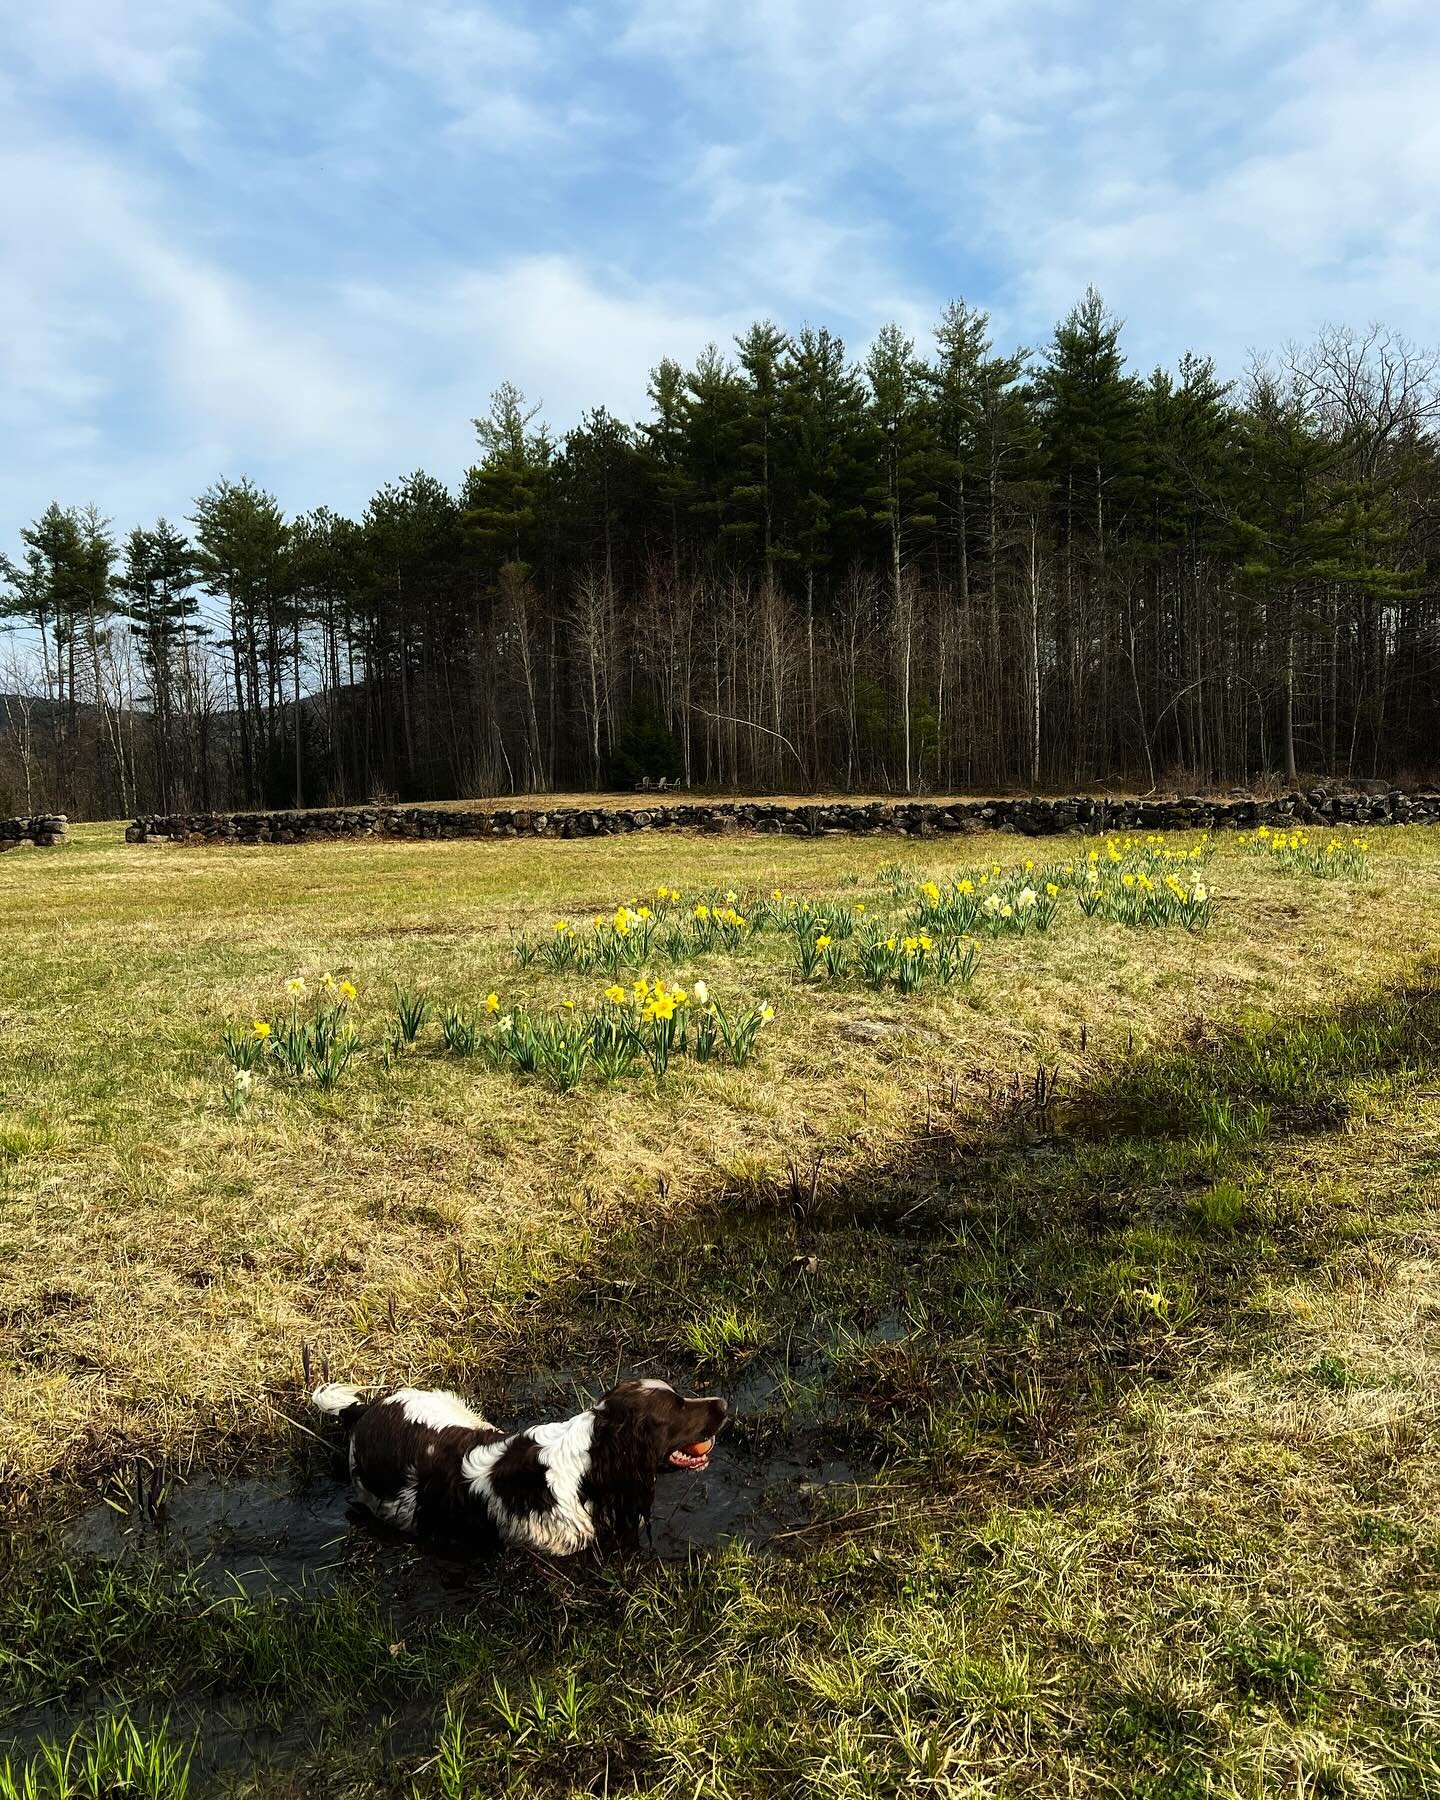 Temperatures are rising (71F/21C) and, mud and black fly 🪰 season are upon us. Tani and I walked out to the field  to check on Mr. H&rsquo;s daffodil patch and take in the last views of the mountain (Pack Monadnock.) It disappears behind the pine tr